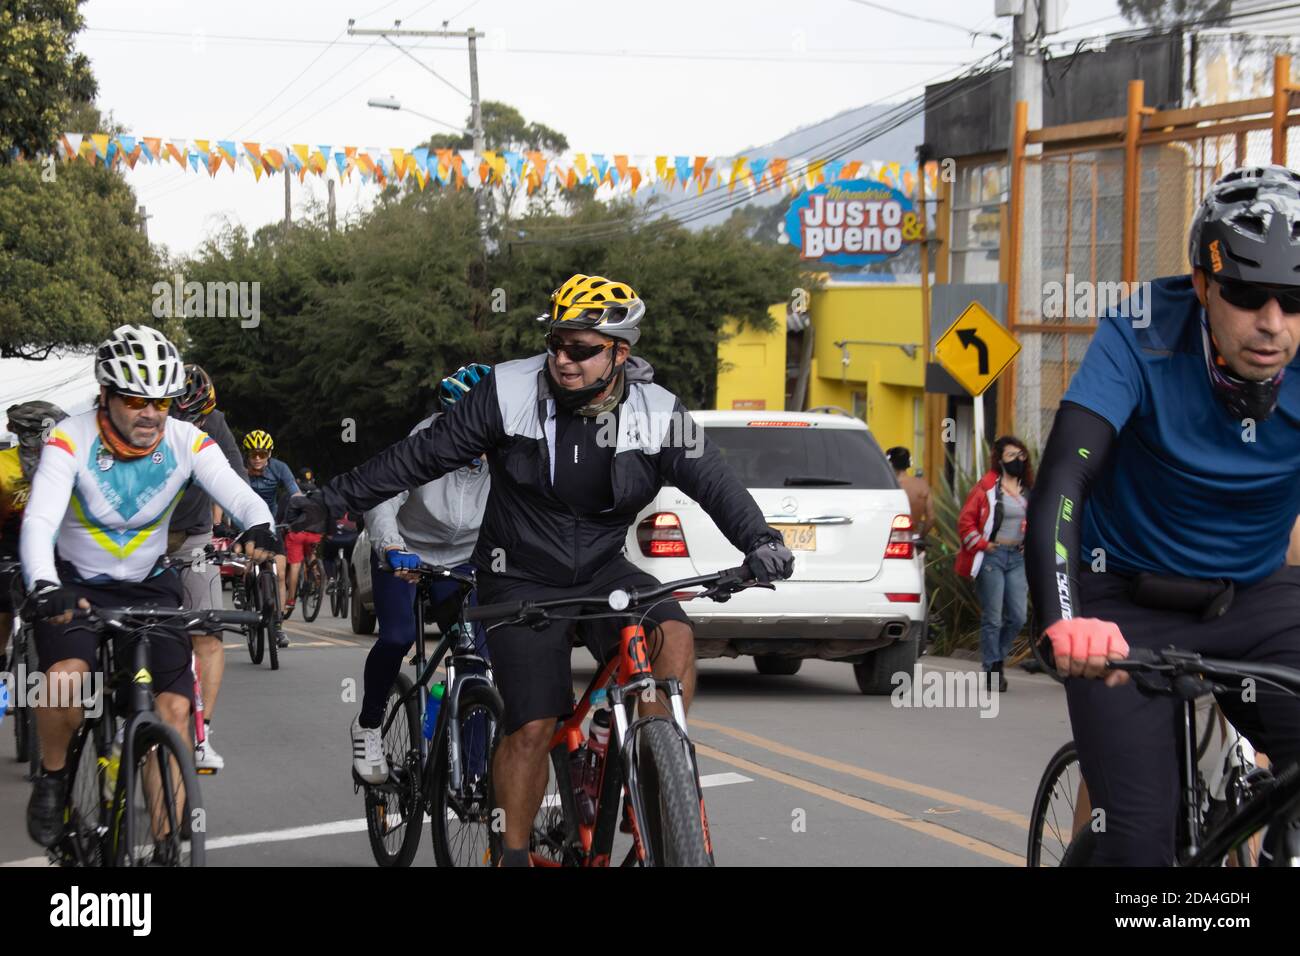 LA CALERA COLOMBIA - OCTOBER, 2020: Group of amateur cyclists arriving to the well known Alto de Patios on the road between Bogota and La Calera on th Stock Photo